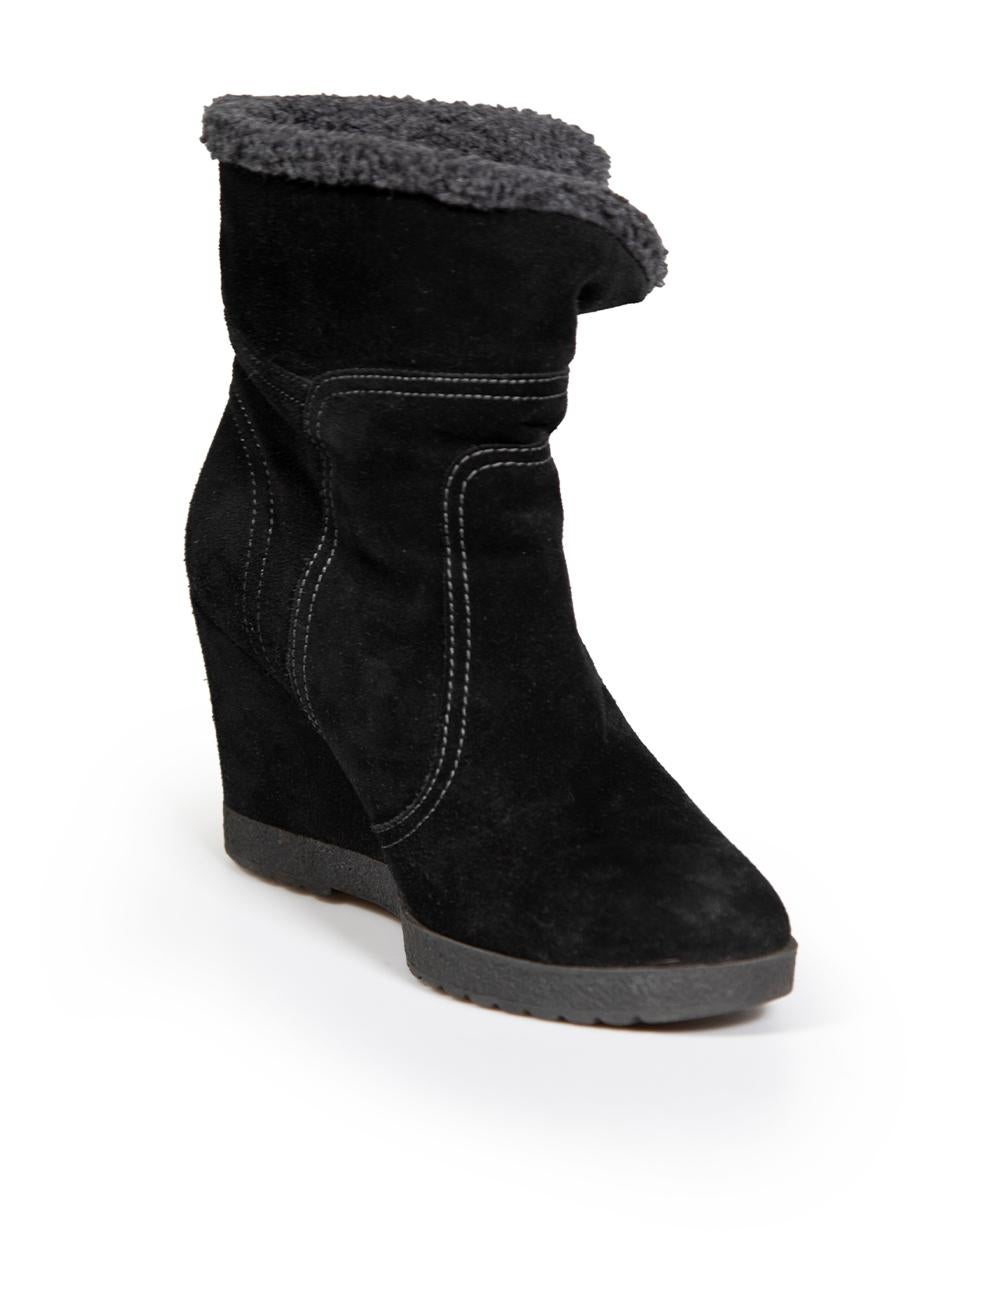 CONDITION is Very good. Minimal wear to boots is evident. Minimal wear to sole, with some slight abrasion to suede on this used Aquatalia designer resale item.
 
 
 
 Details
 
 
 Black
 
 Suede
 
 Winter boots
 
 Round toe
 
 High wedge heel
 
